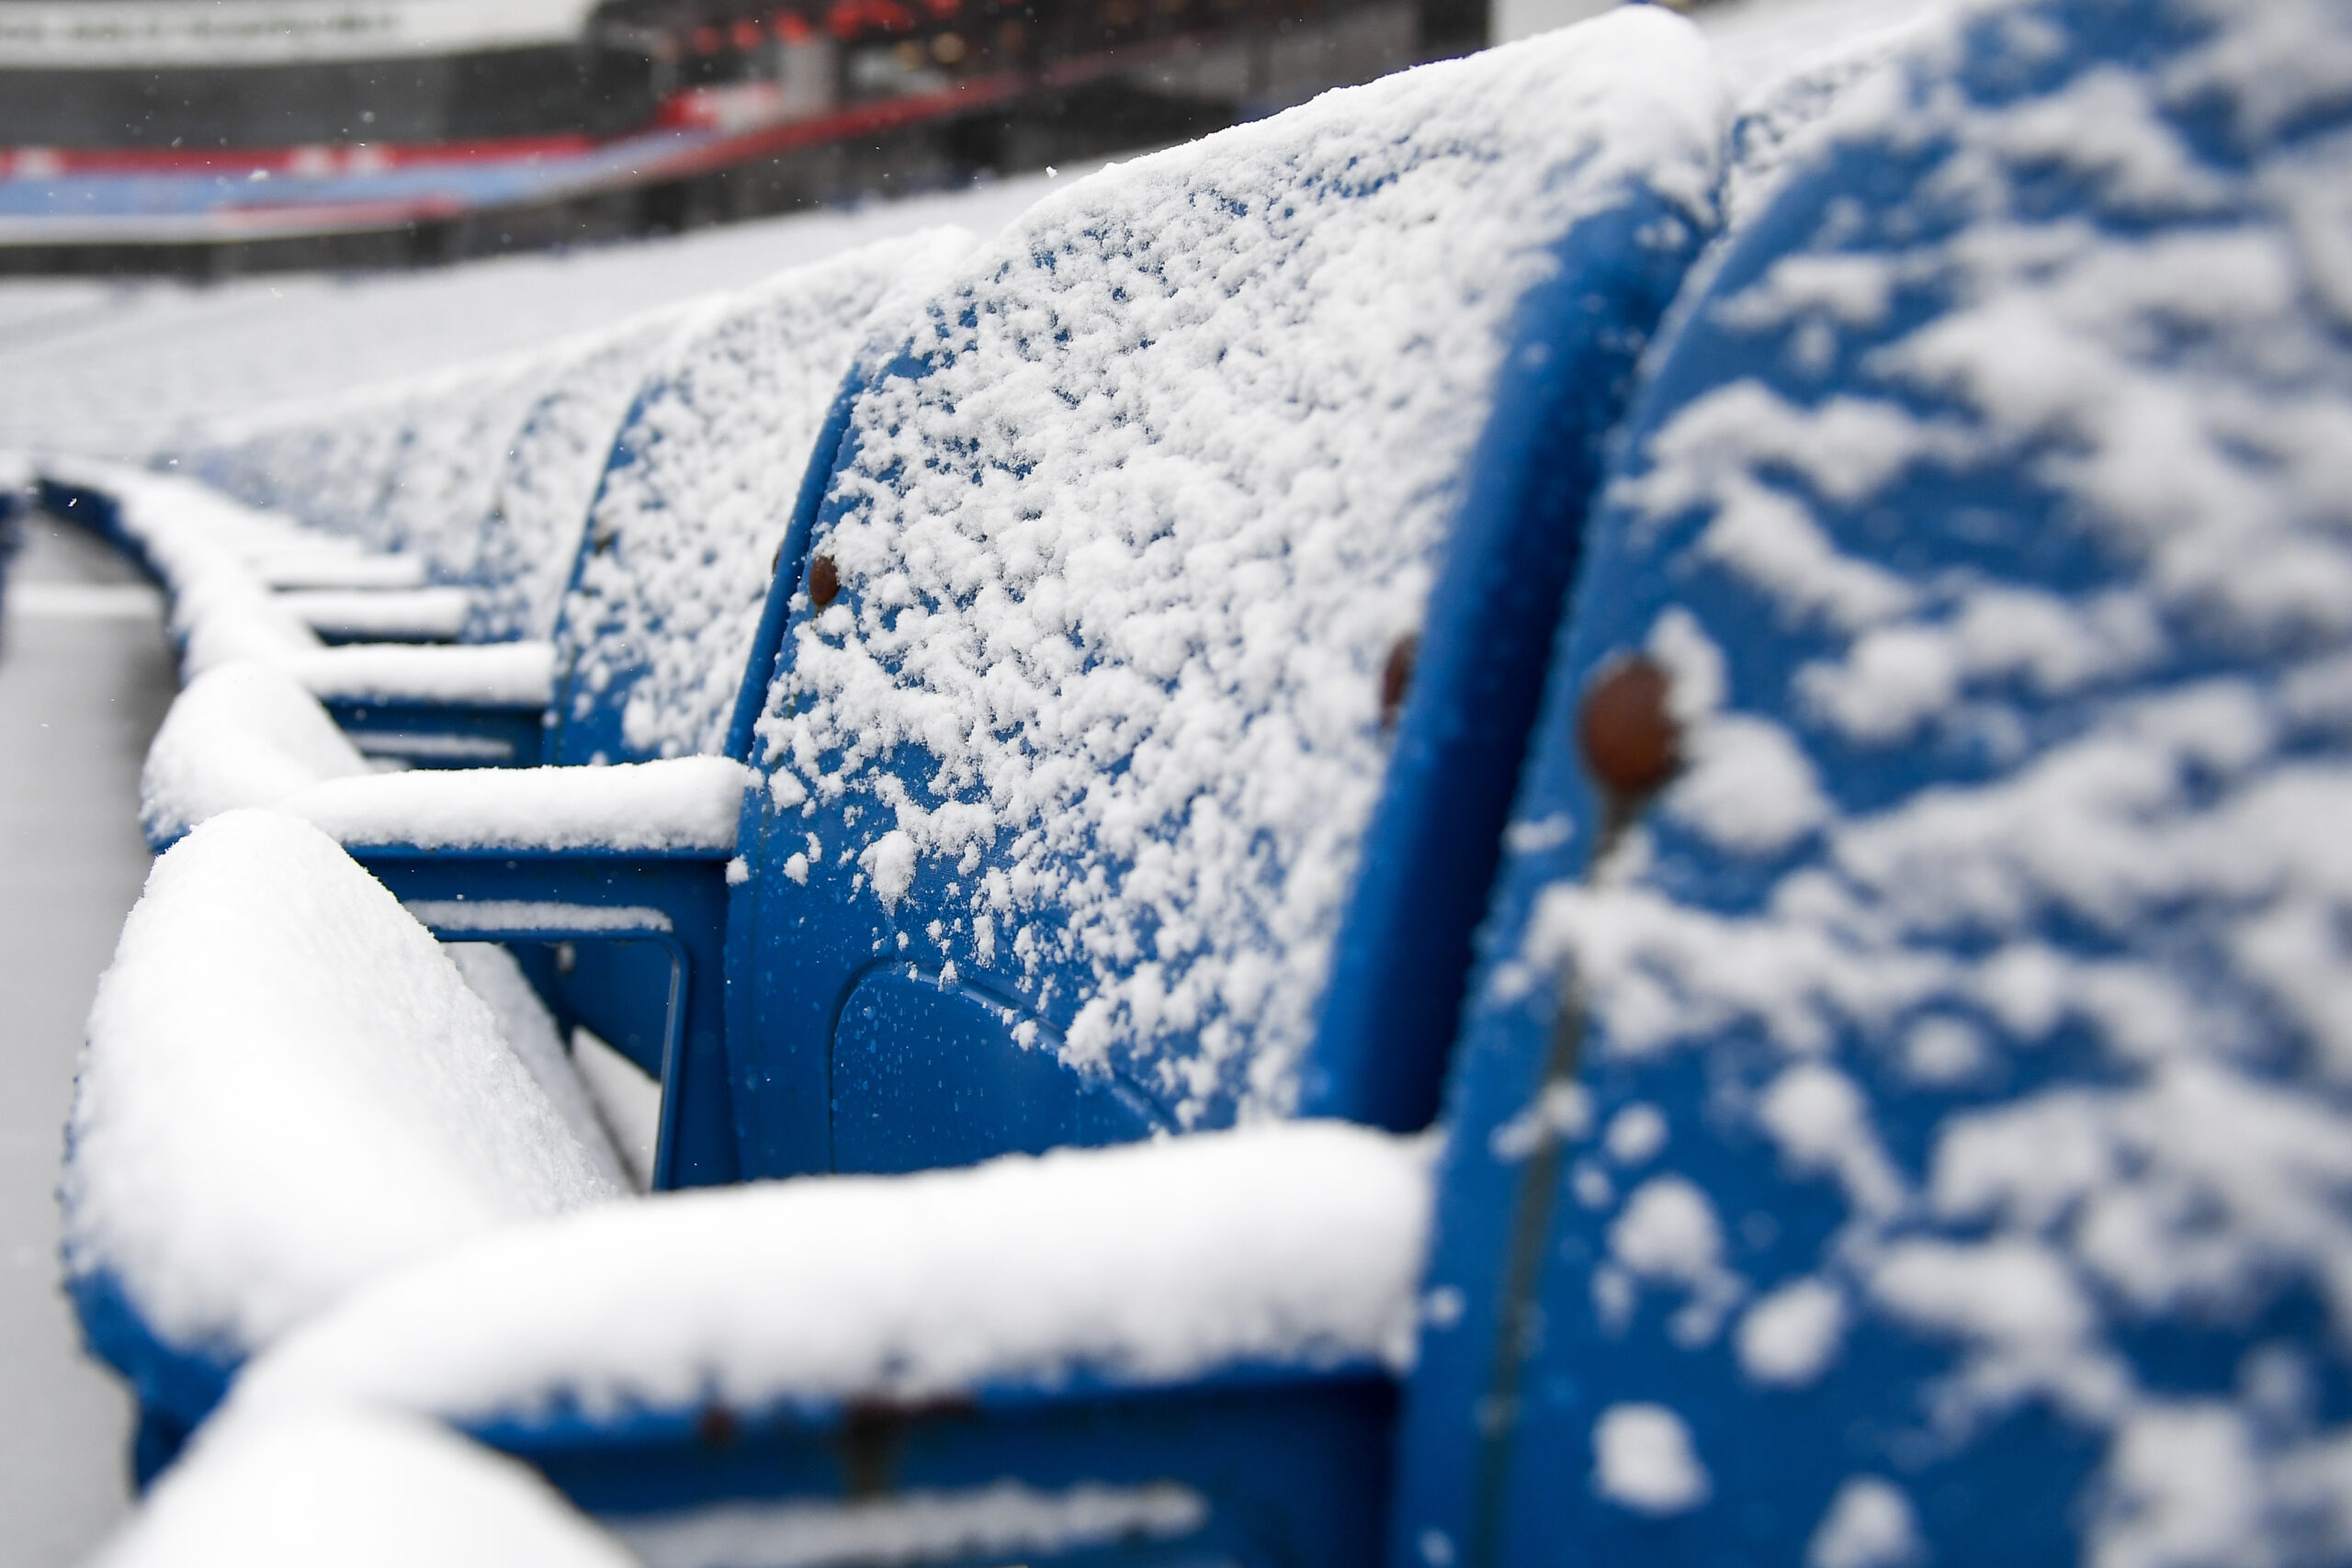 Bills-Browns game moved to Detroit due to Buffalo snow storm